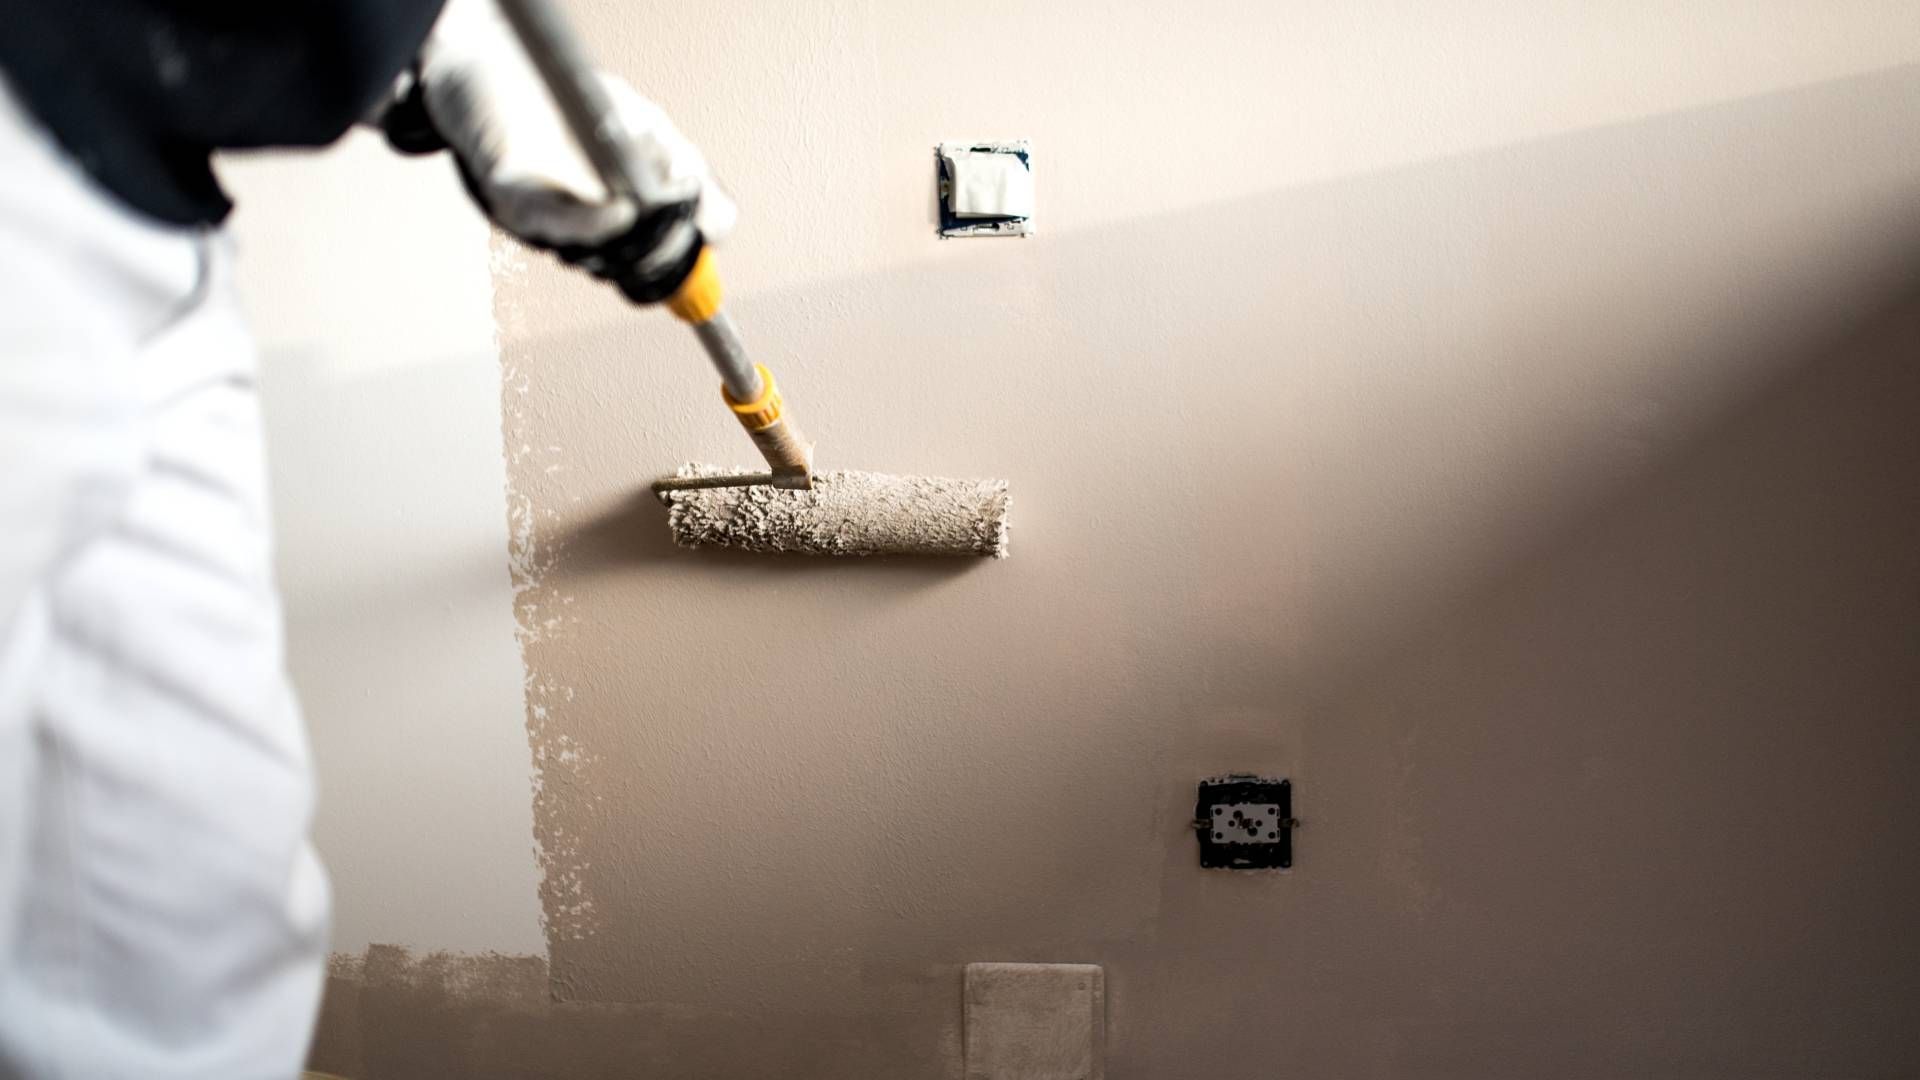 A professional painter applies paint to the walls of a home near Johnson City, Tennessee (TN)